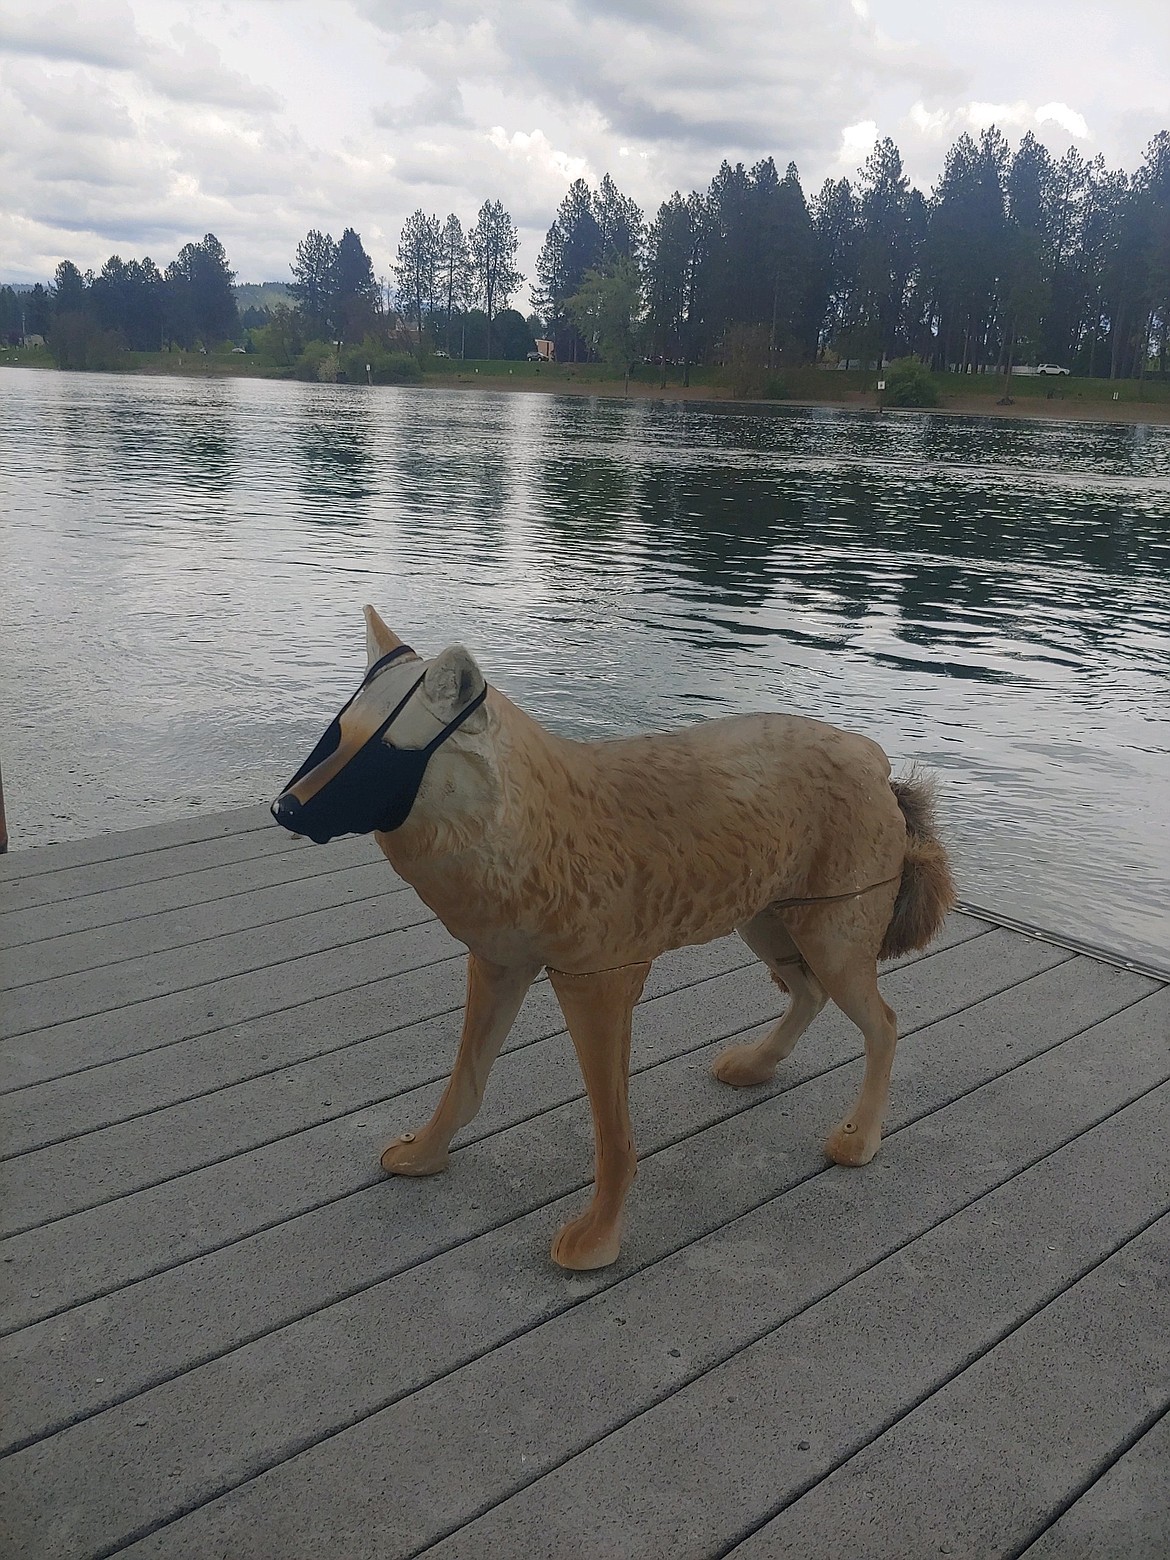 The famous coyotes along the dock at Cedars stand ready to accept visitors, particularly with their newly equipped protective masks. Cedars will implement a dockside service for boaters, a way to generate new revenue in a time of uncertainty.